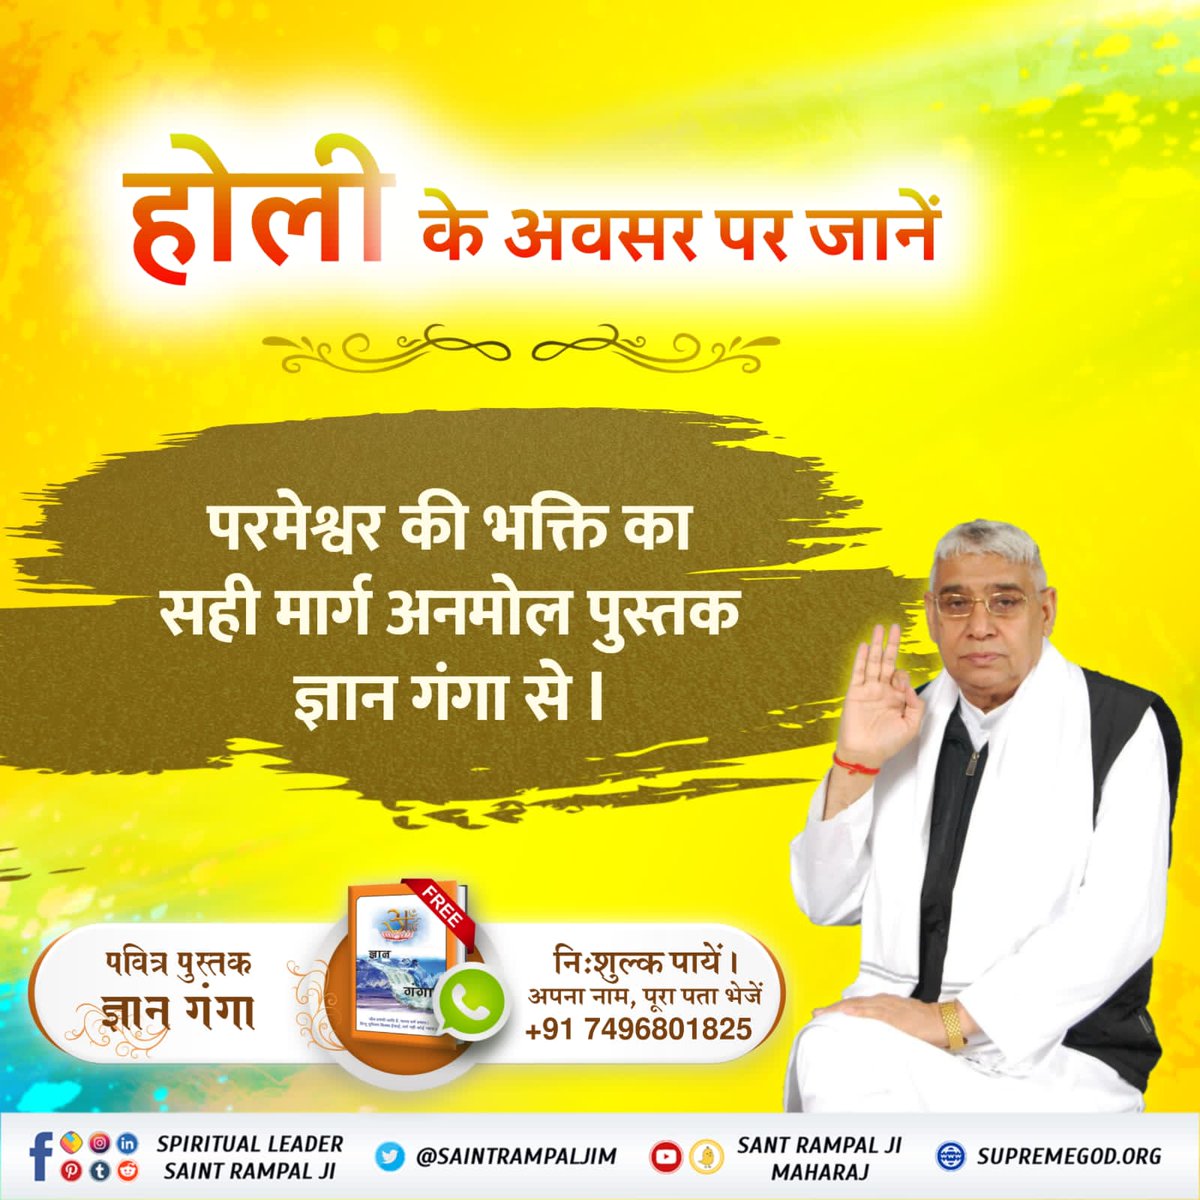 To get the GOD who gives all happiness, we have to play Holi in the name of Ram.
#सतभक्ति_की_होली
Sant Rampal Ji Maharaj